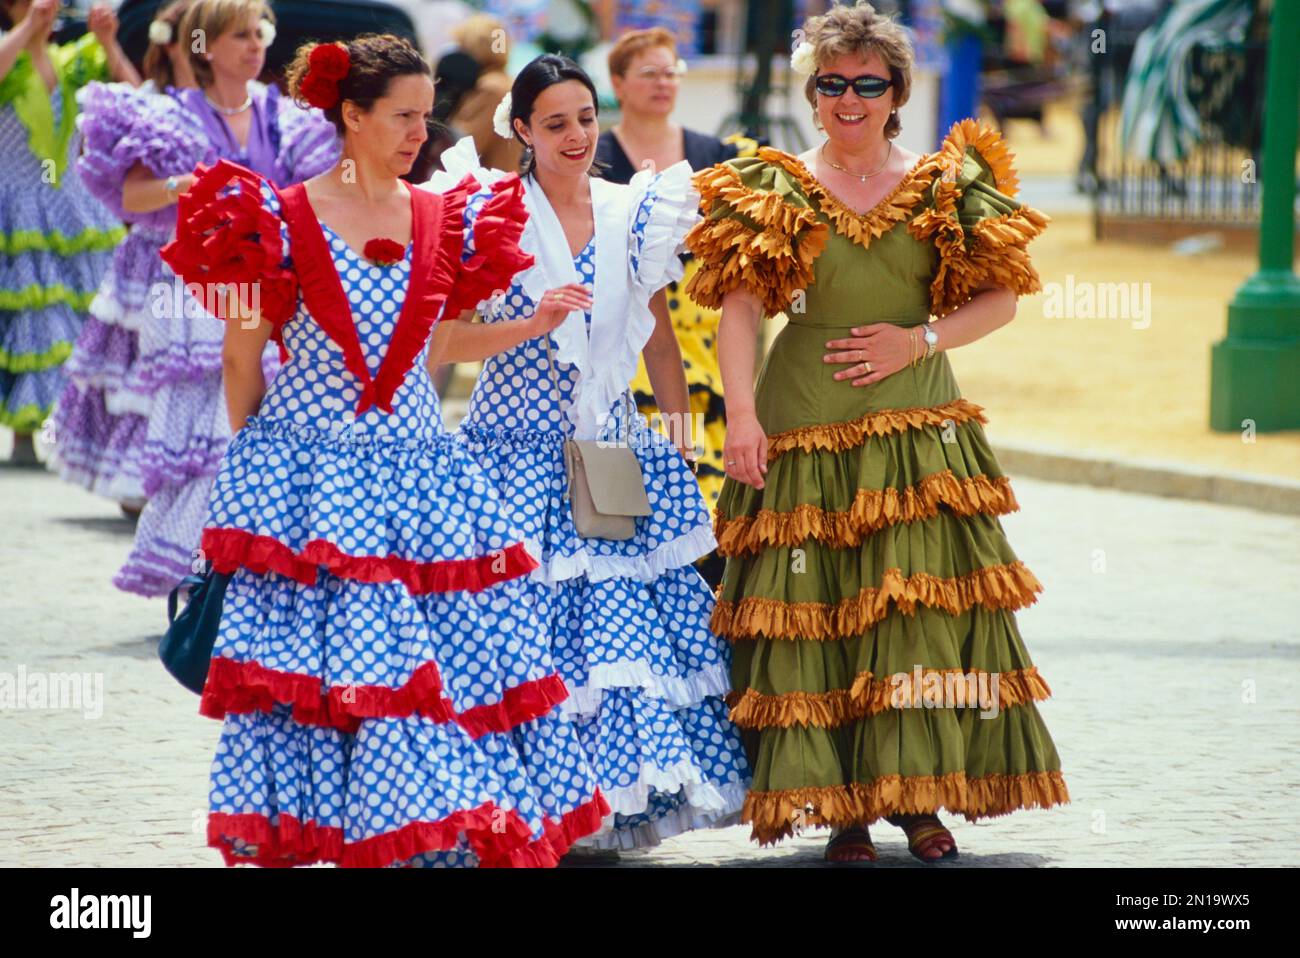 Women in costume at the Seville Fair Stock Photo